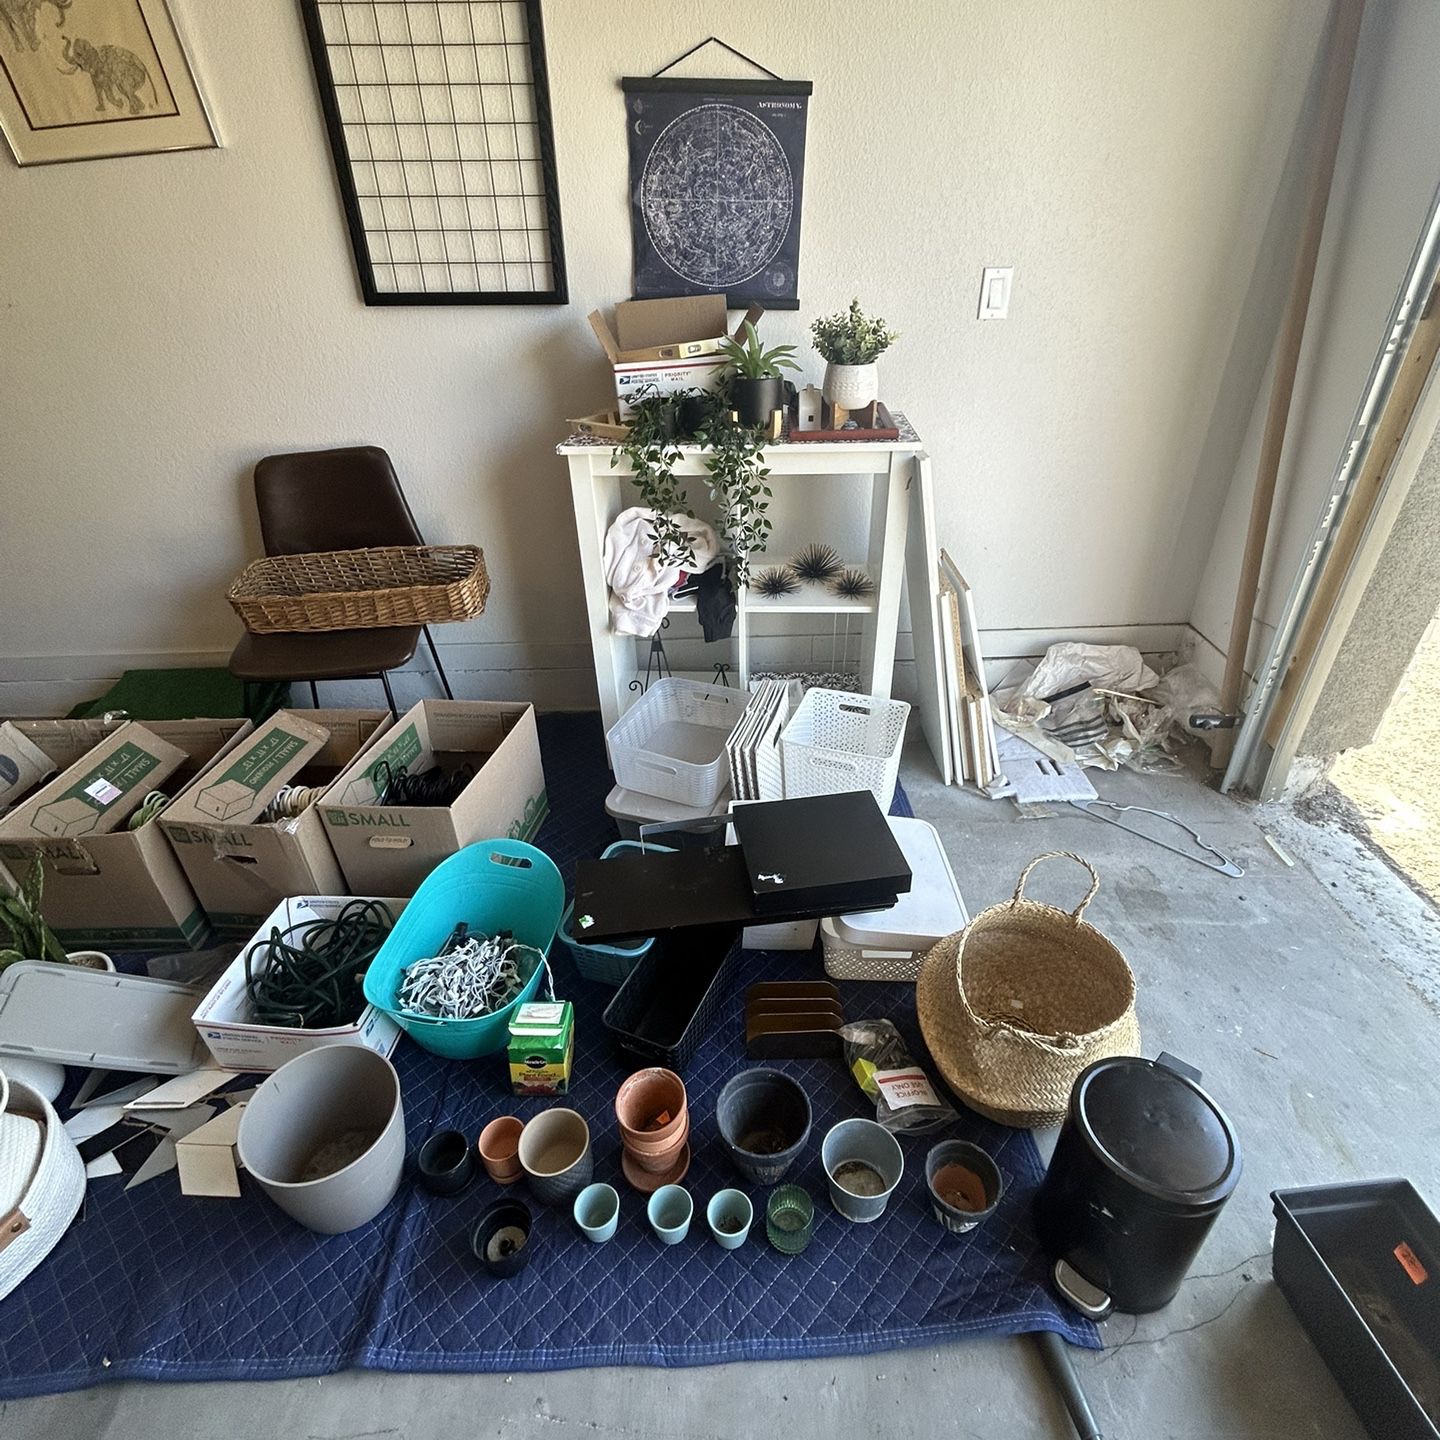 MOVE OUT SALE/ STAGING ITEMS*